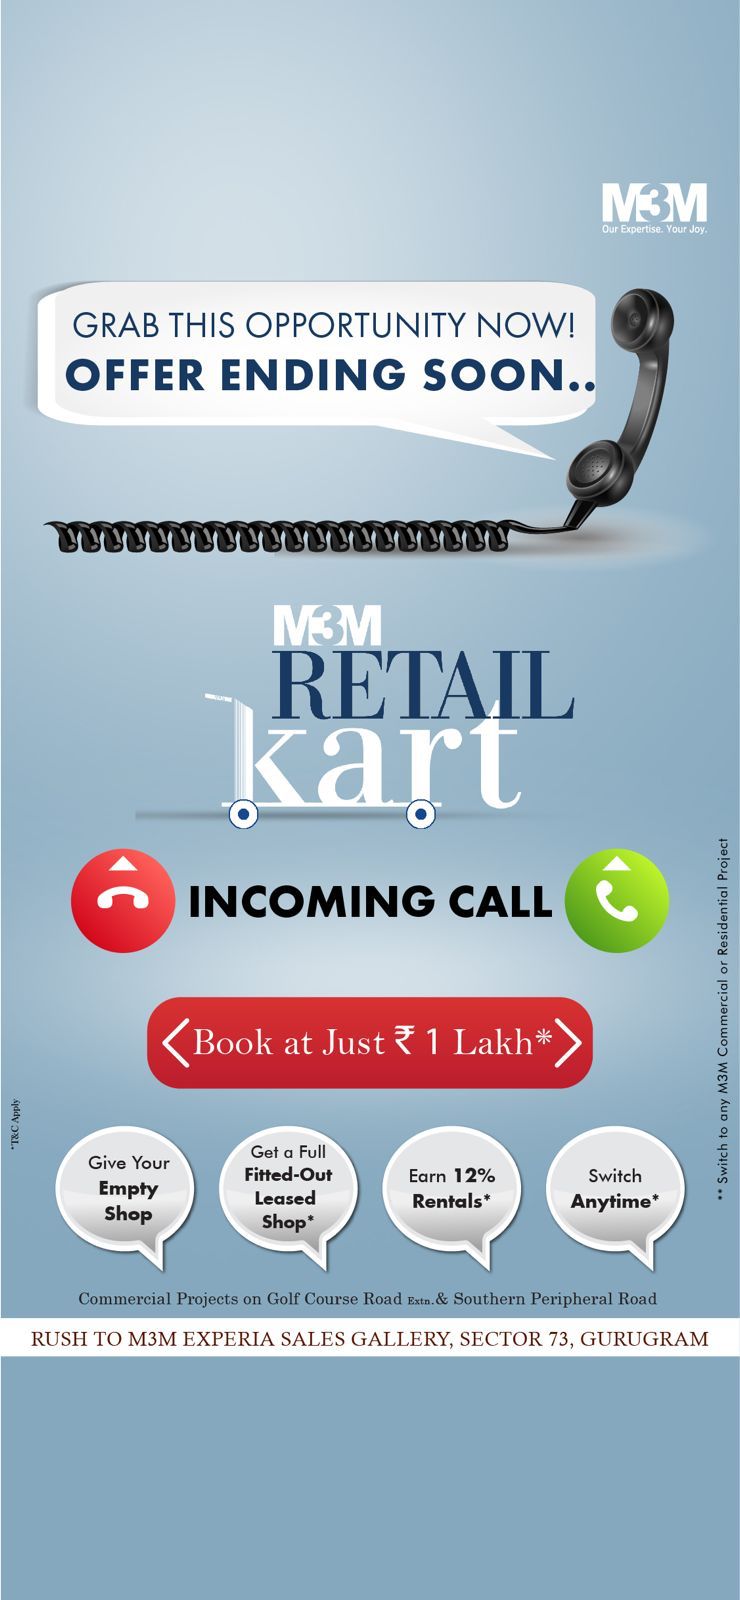 Grab this opportunity now! offer ending soon at M3M Retail Kart